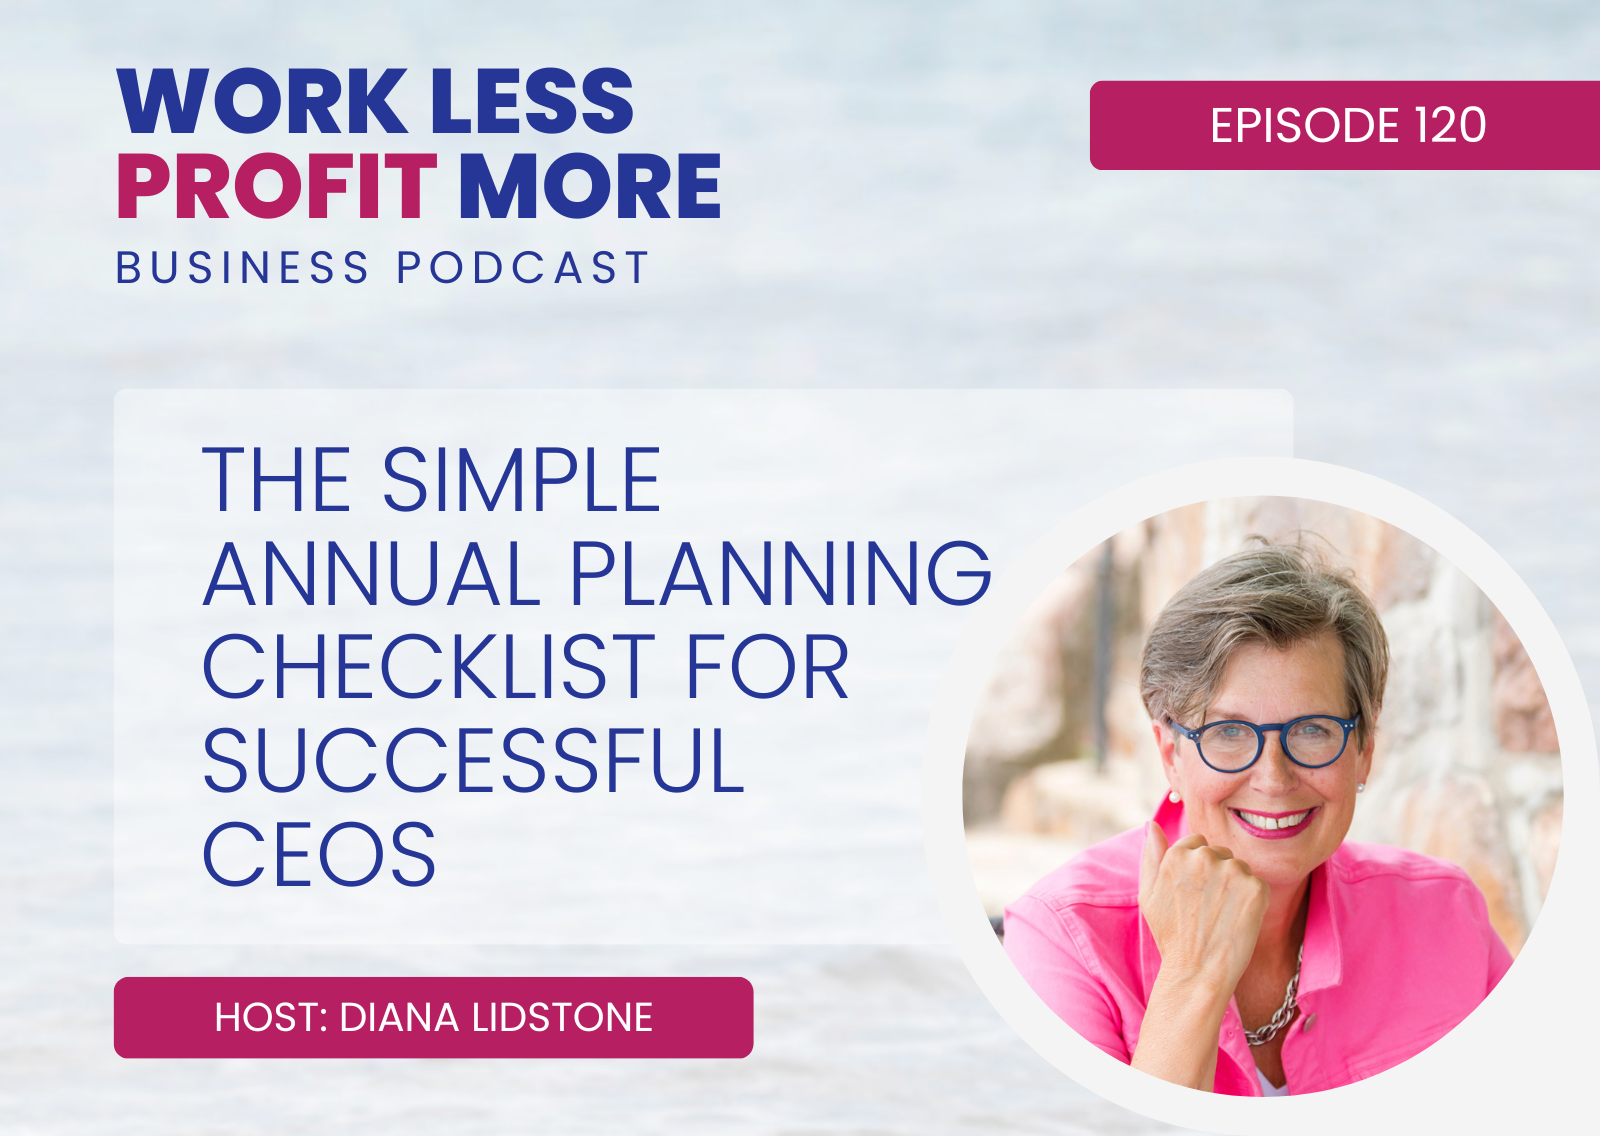 The Simple Annual Planning Checklist For Successful CEOs